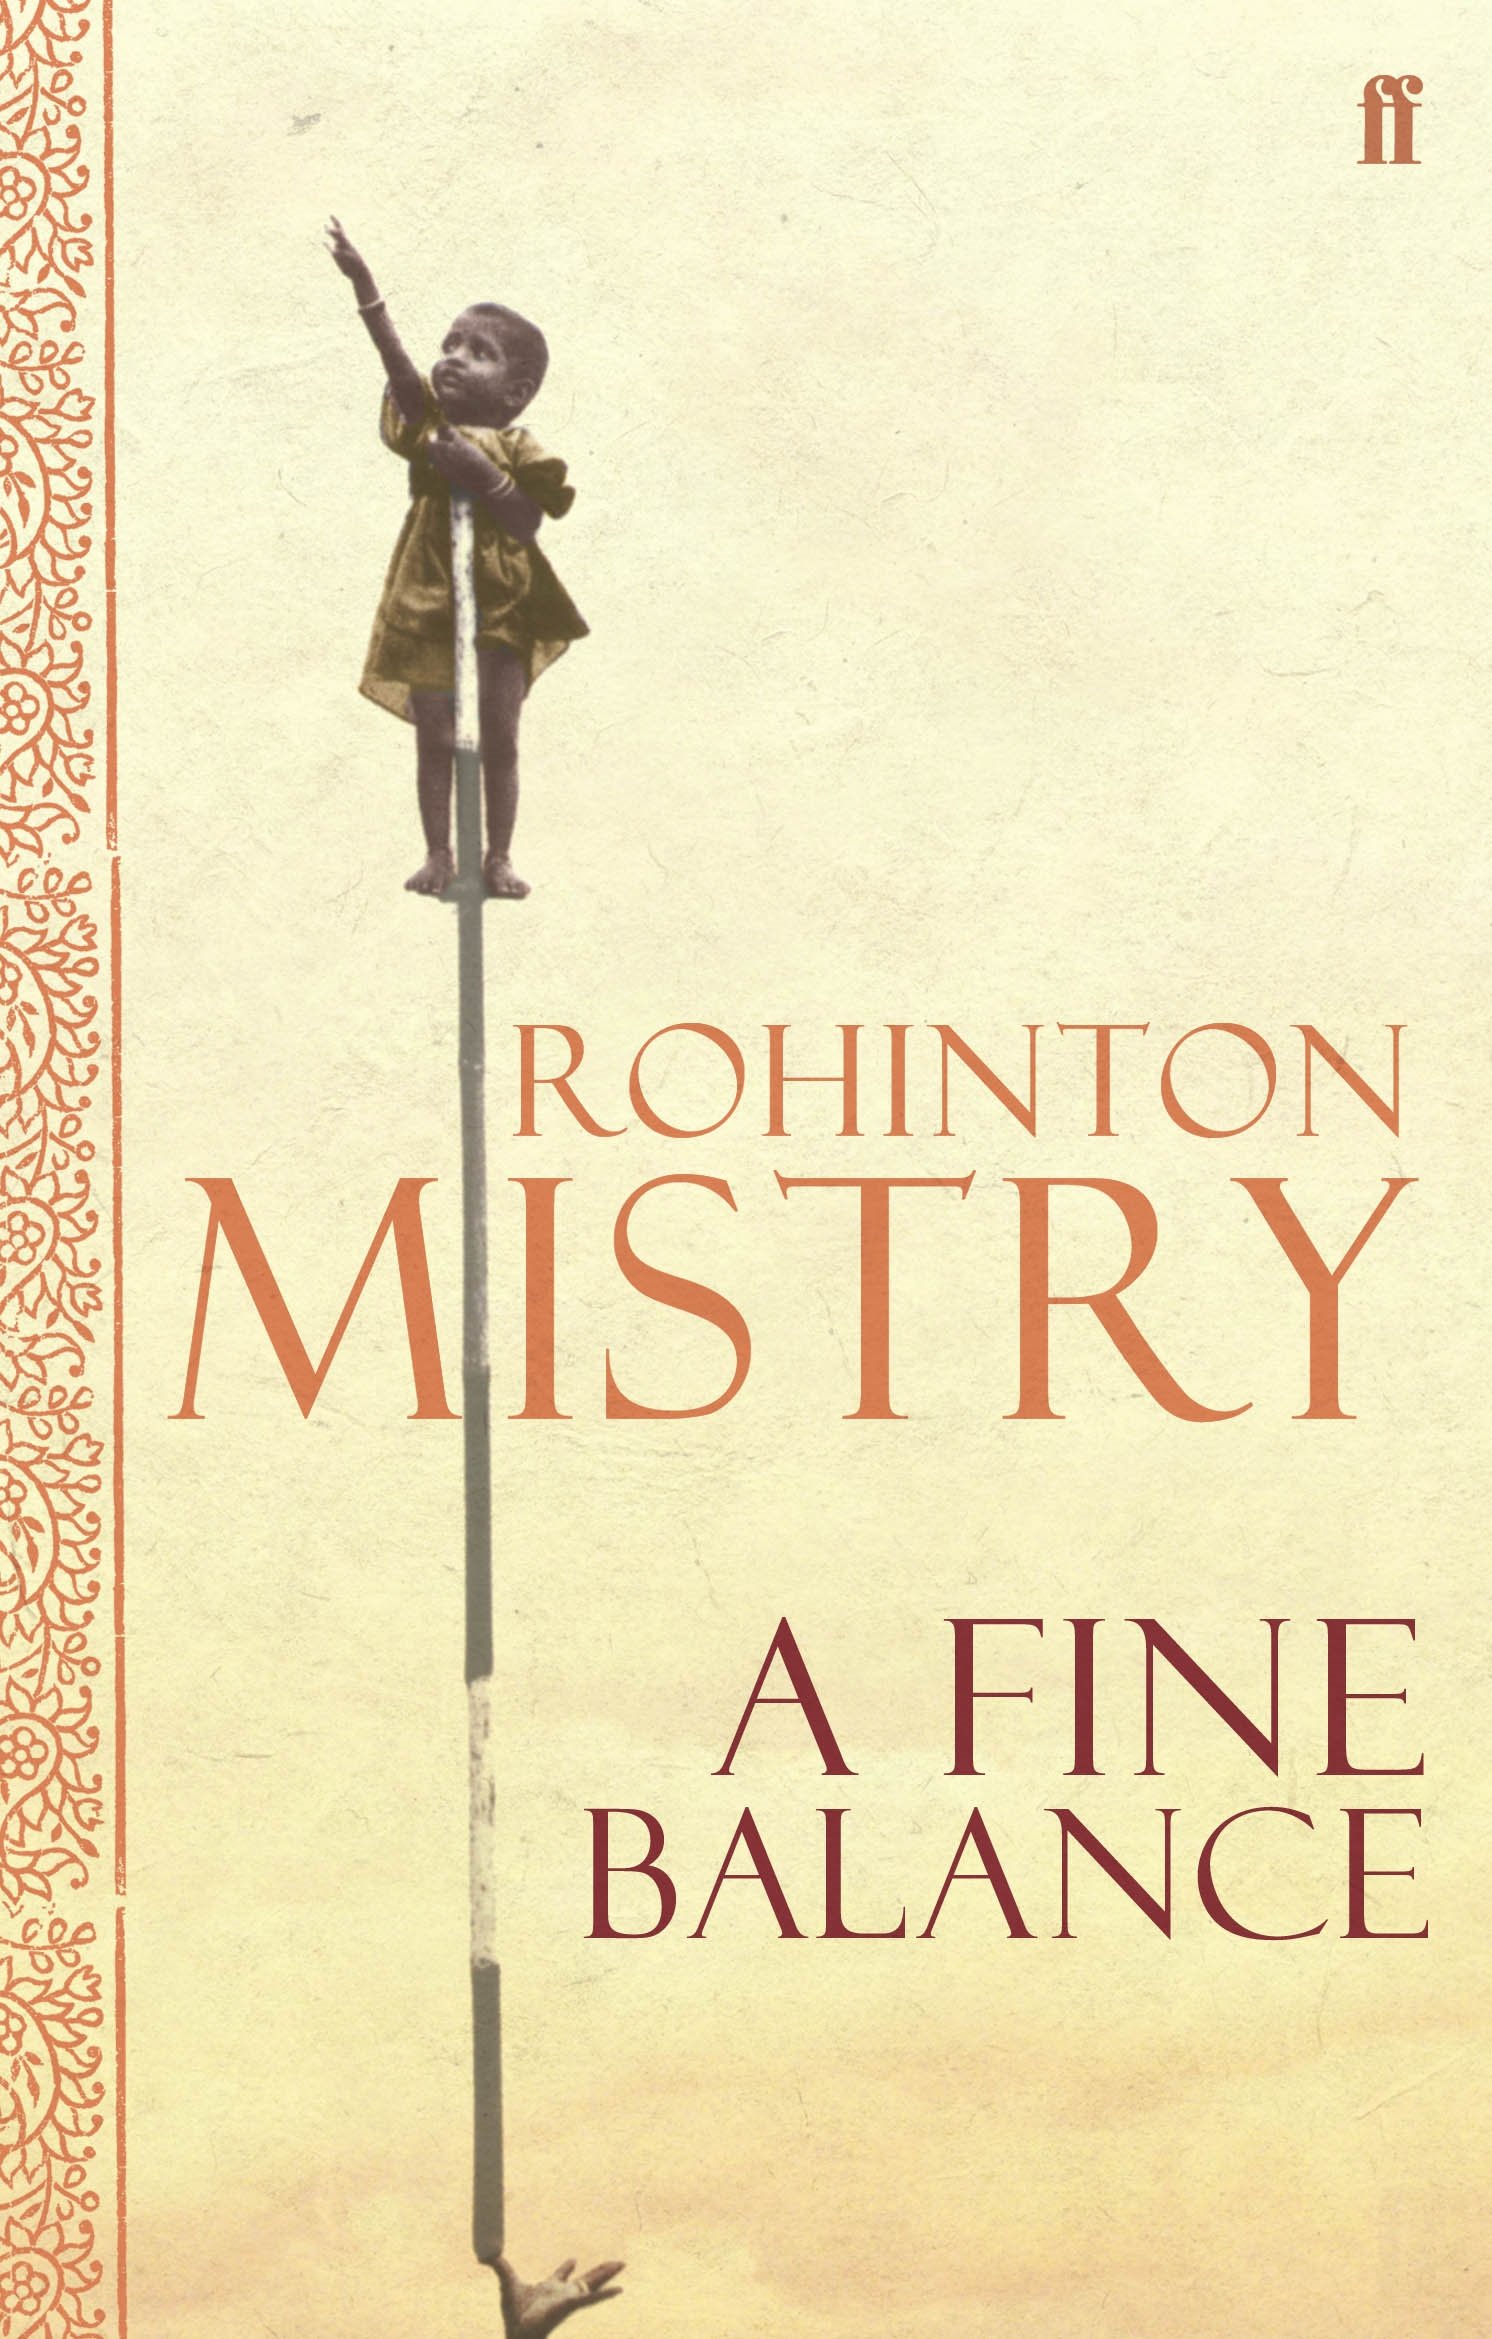 Mistry　Balance　A　Rohinton　Shop　Books　Faber　Fine　by